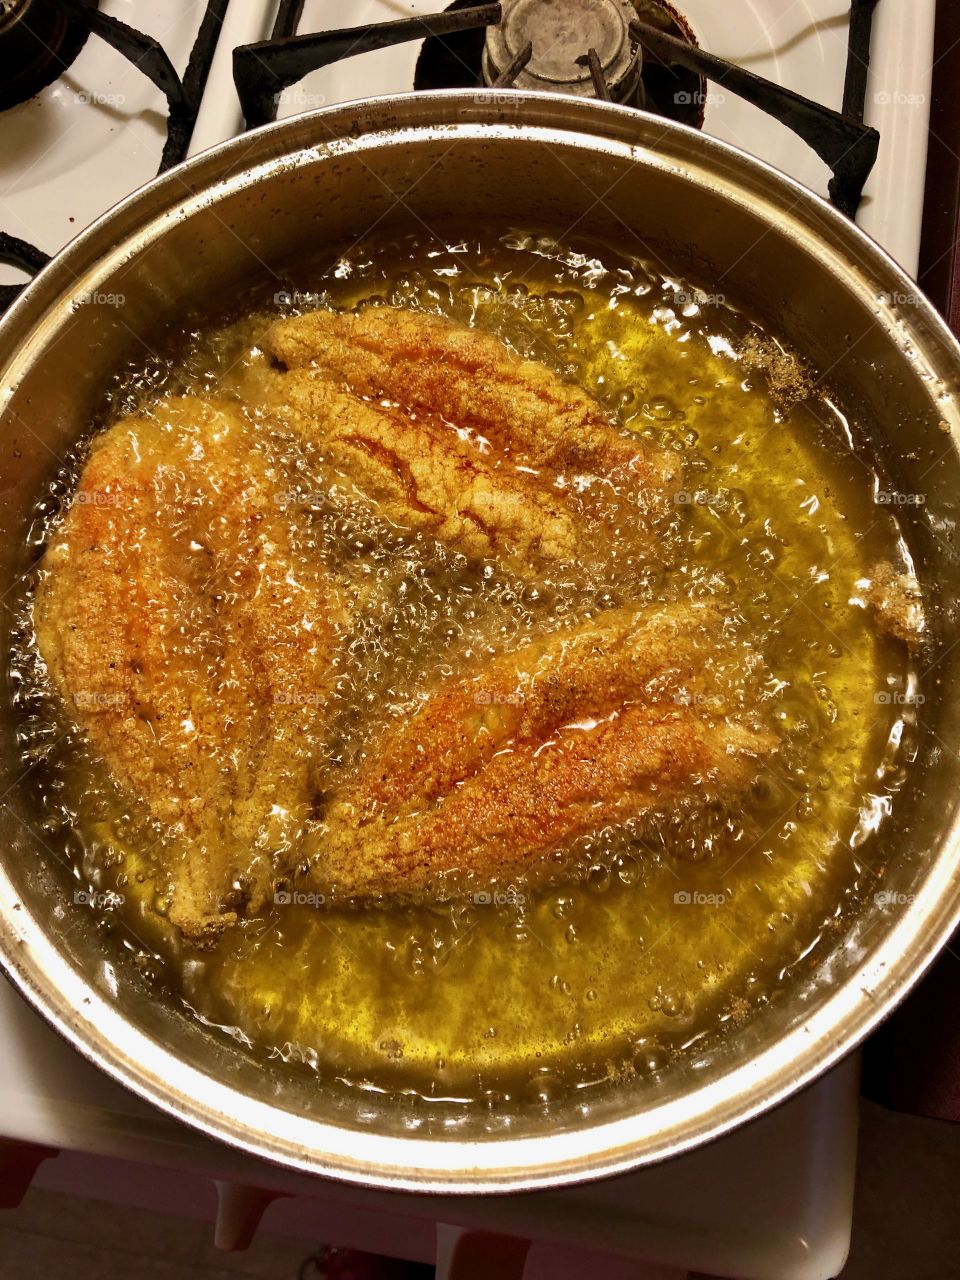 Fish fried to perfection cooked in vegetable oil...Mina 1017 